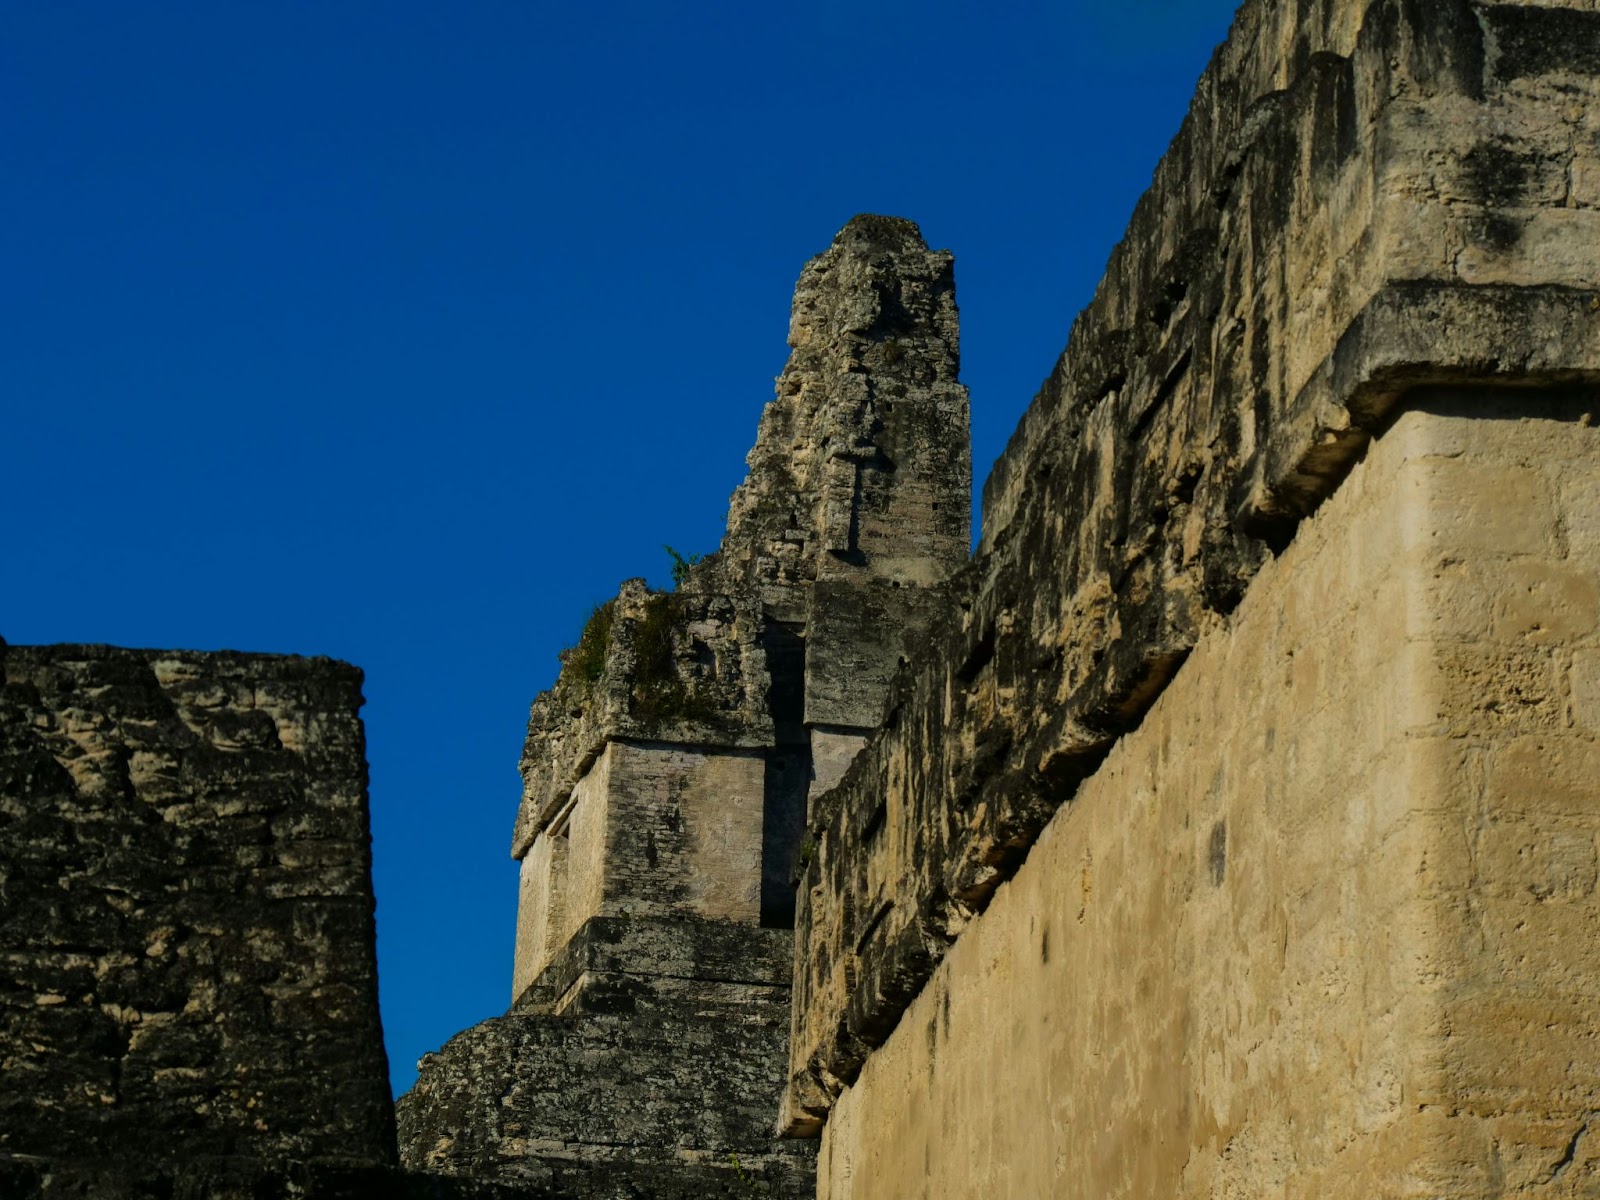 There is a Mayan history in Guatemala that travelers should explore. 
pictured: Guatemala Mayan ruin